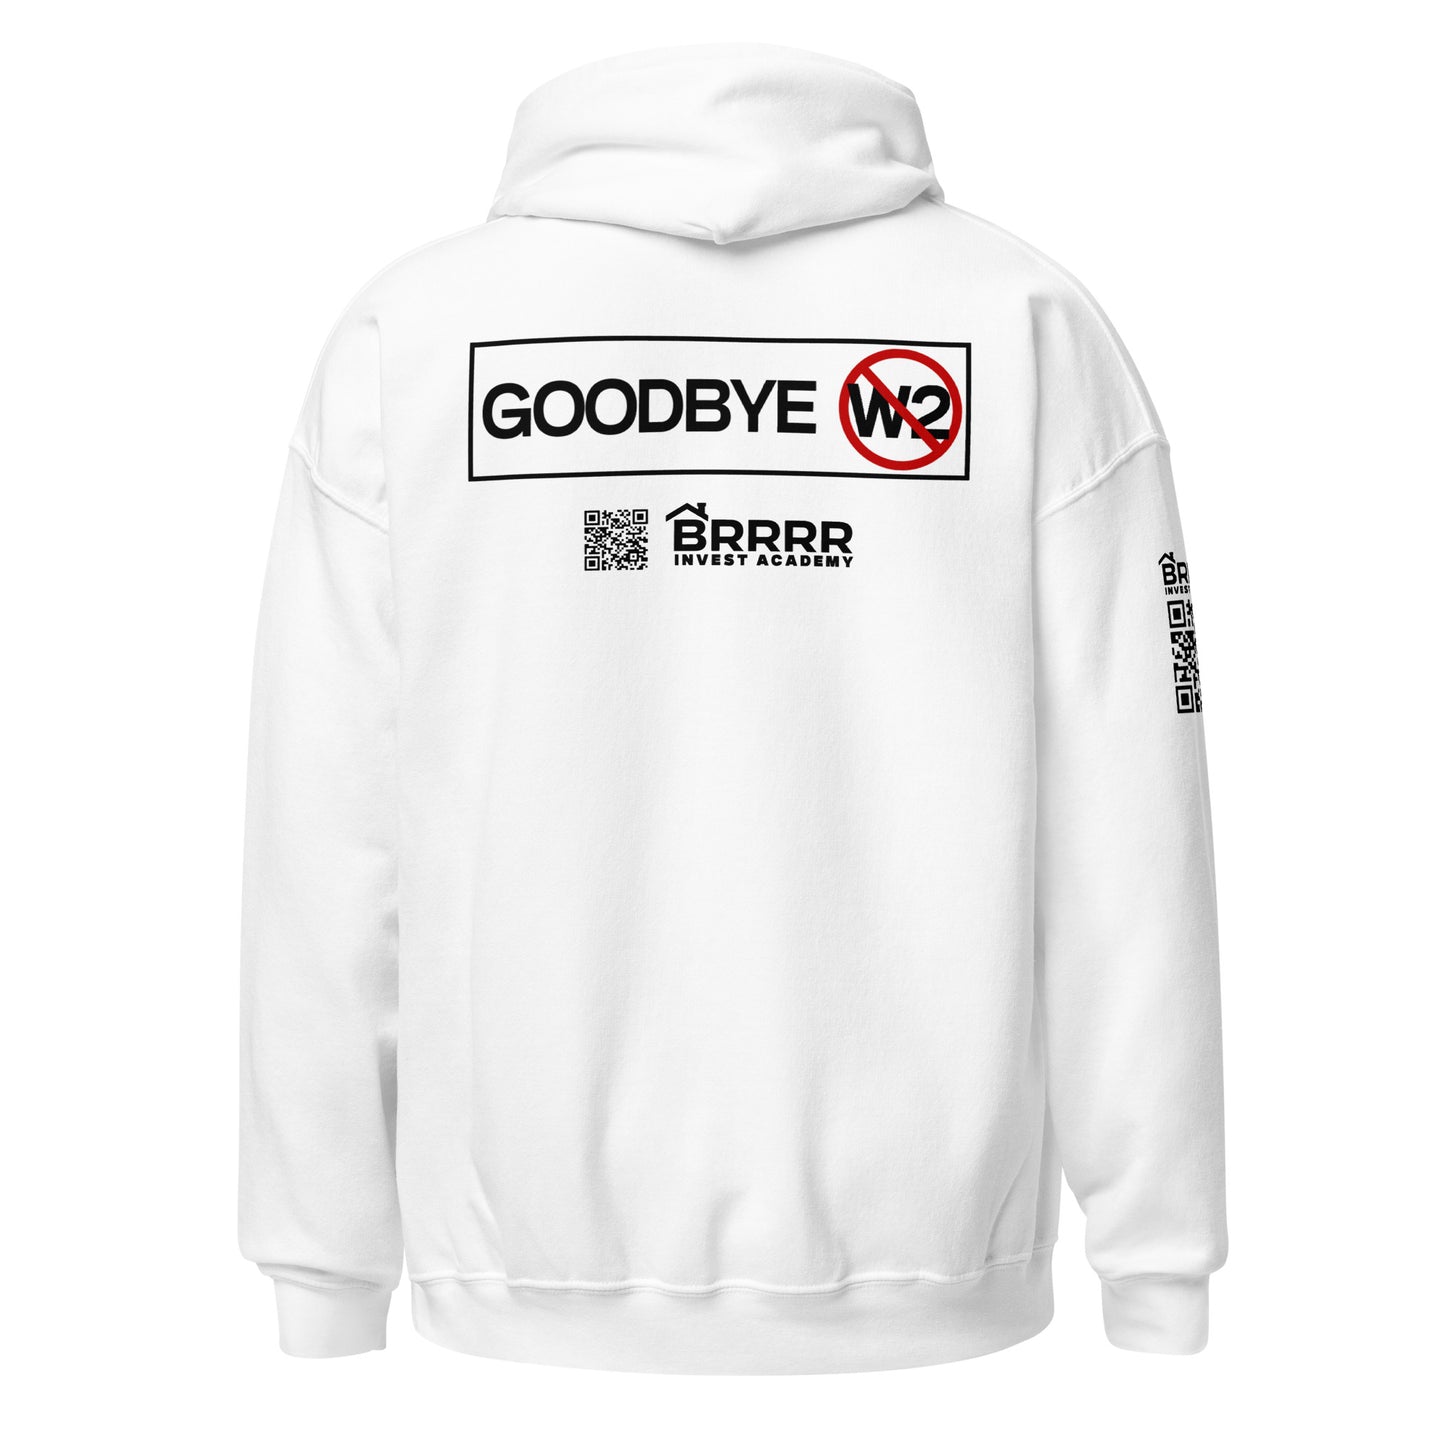 BRRRR Your Time Back Hoodie